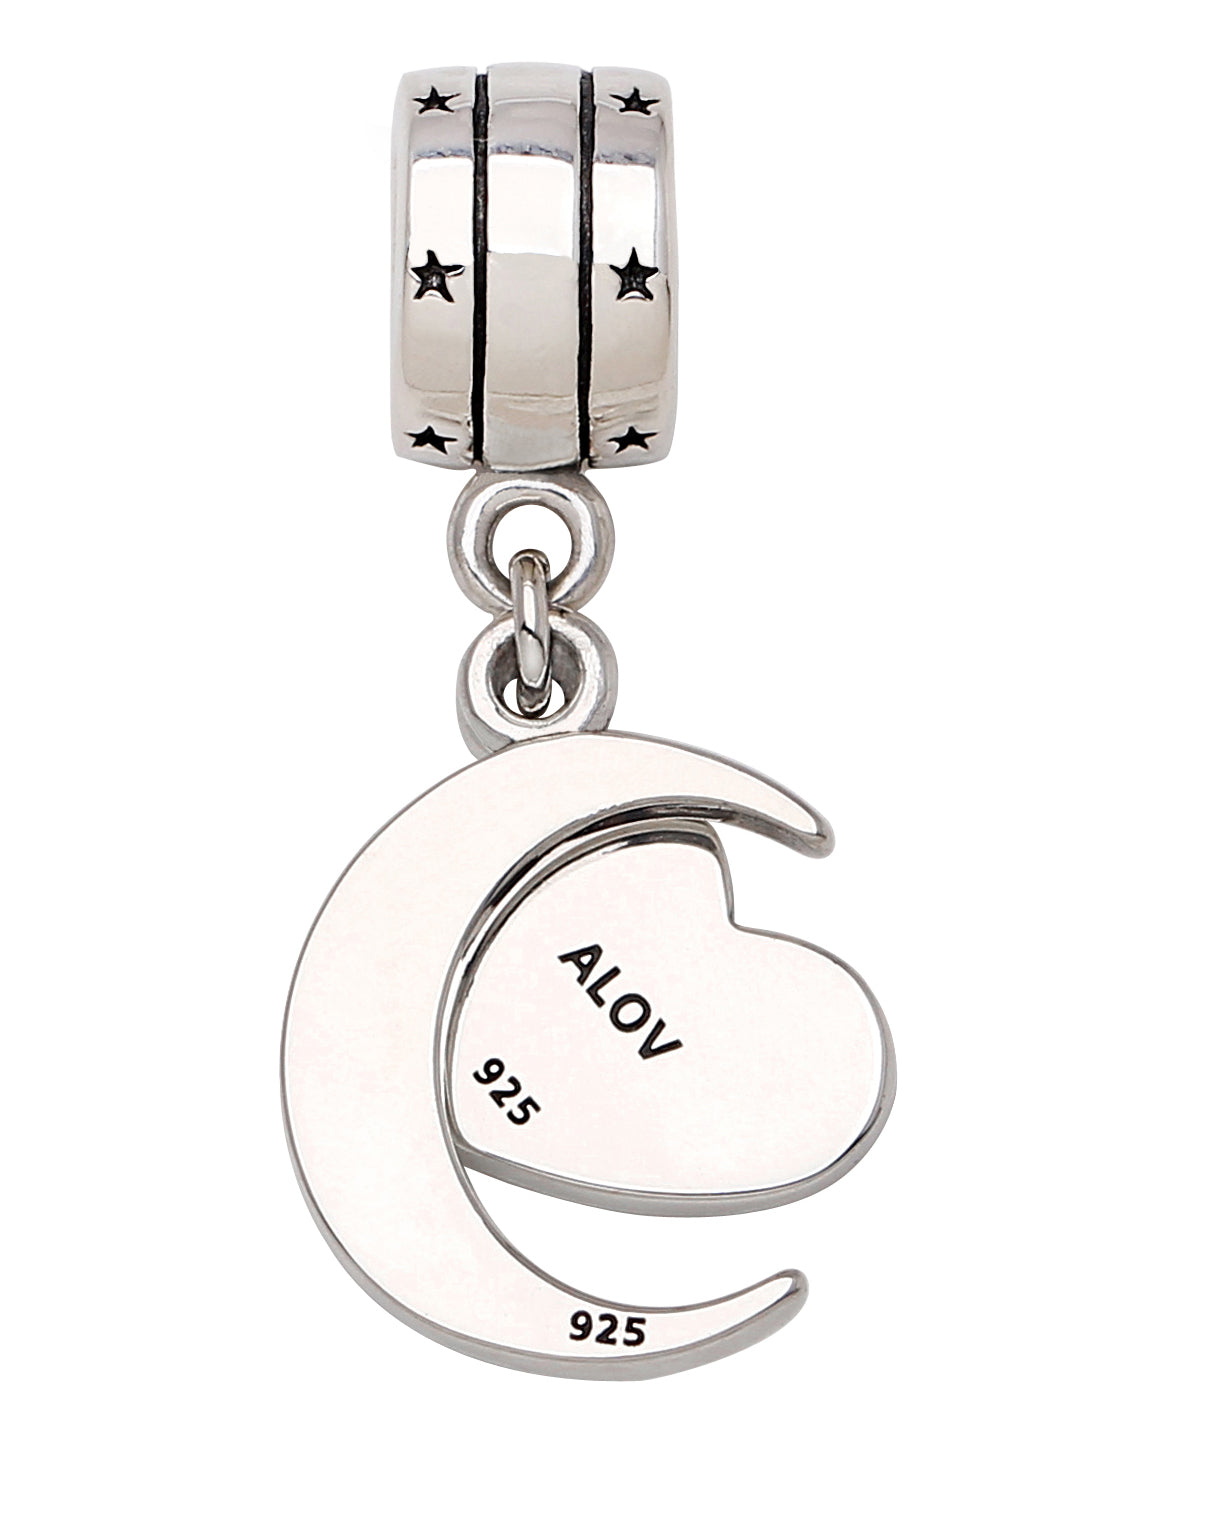 „I Love You To The Moon and Back“ Zweiteiliger Anhänger-Perlen-Charm ALOV Sterling Silber